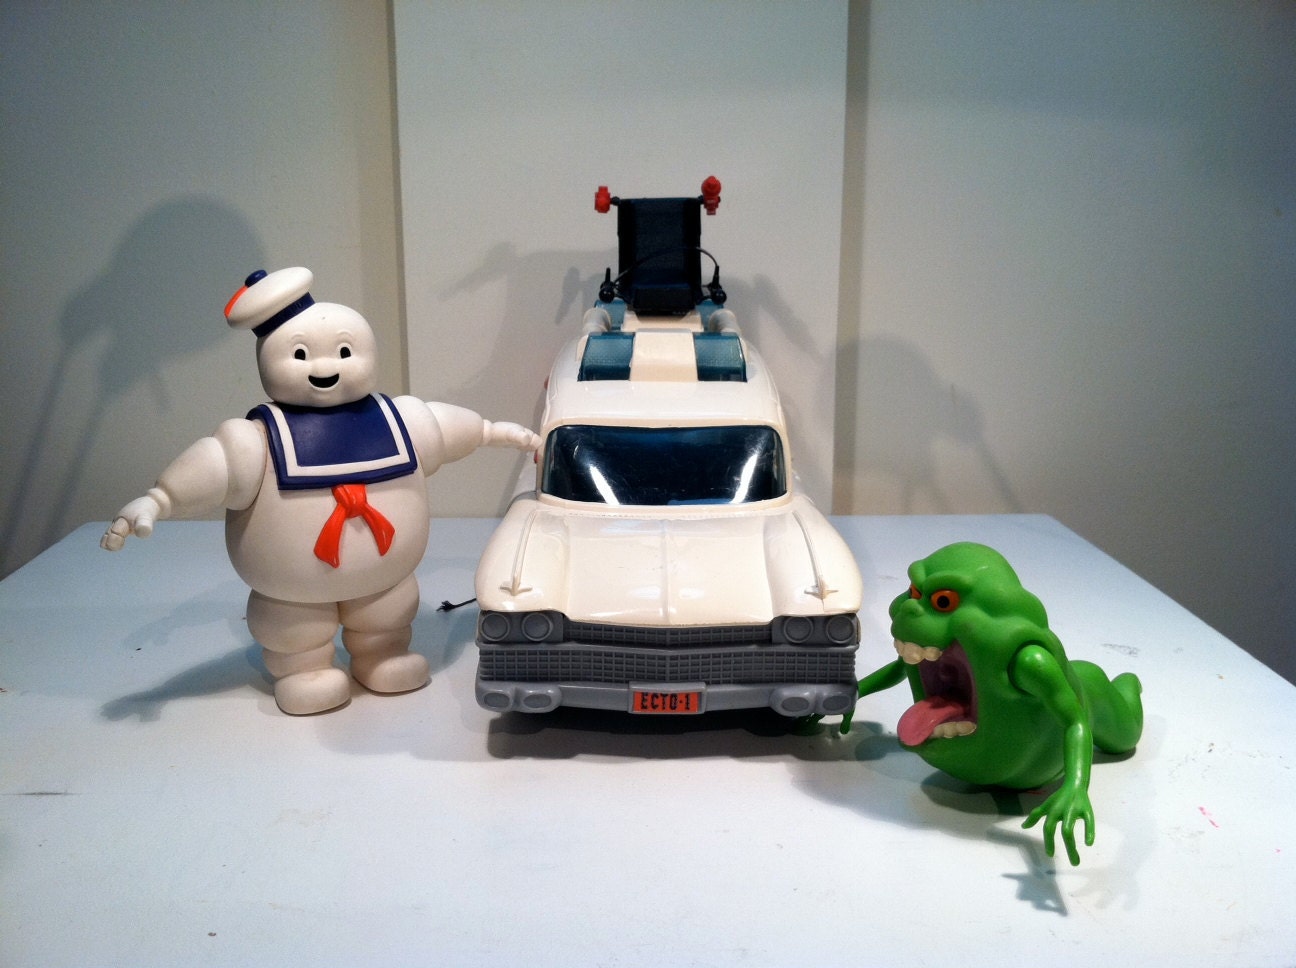 1984 vintage ghostbuster ecto 1 chair